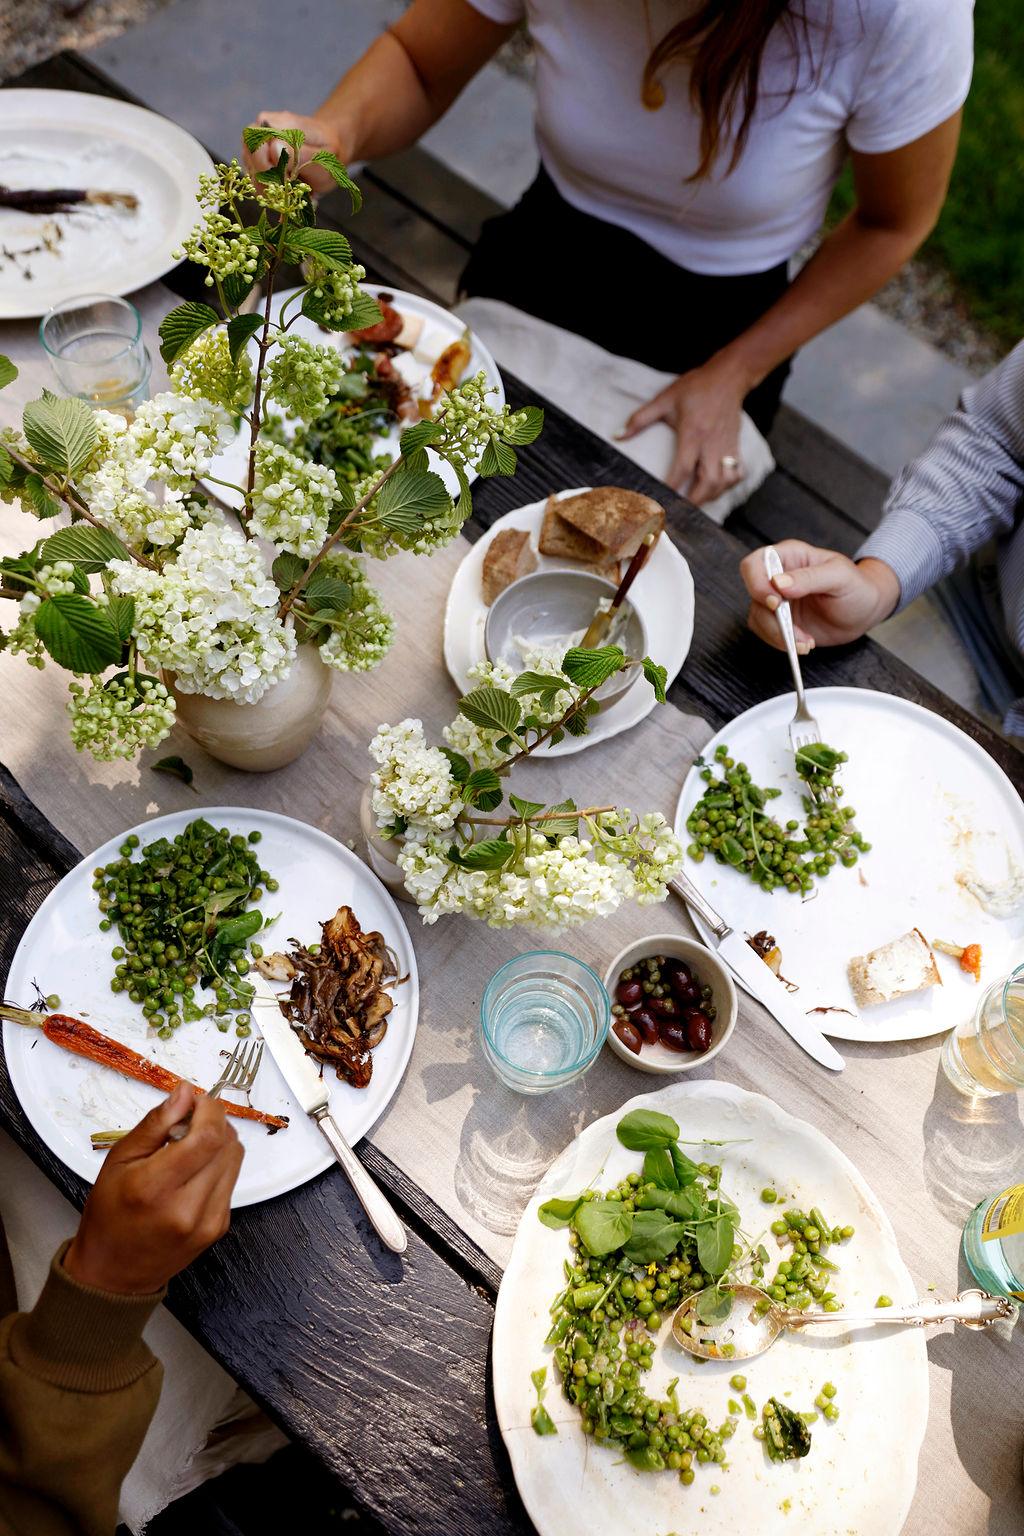 This Is The Best Time To Host A Dinner Party, According To Experts